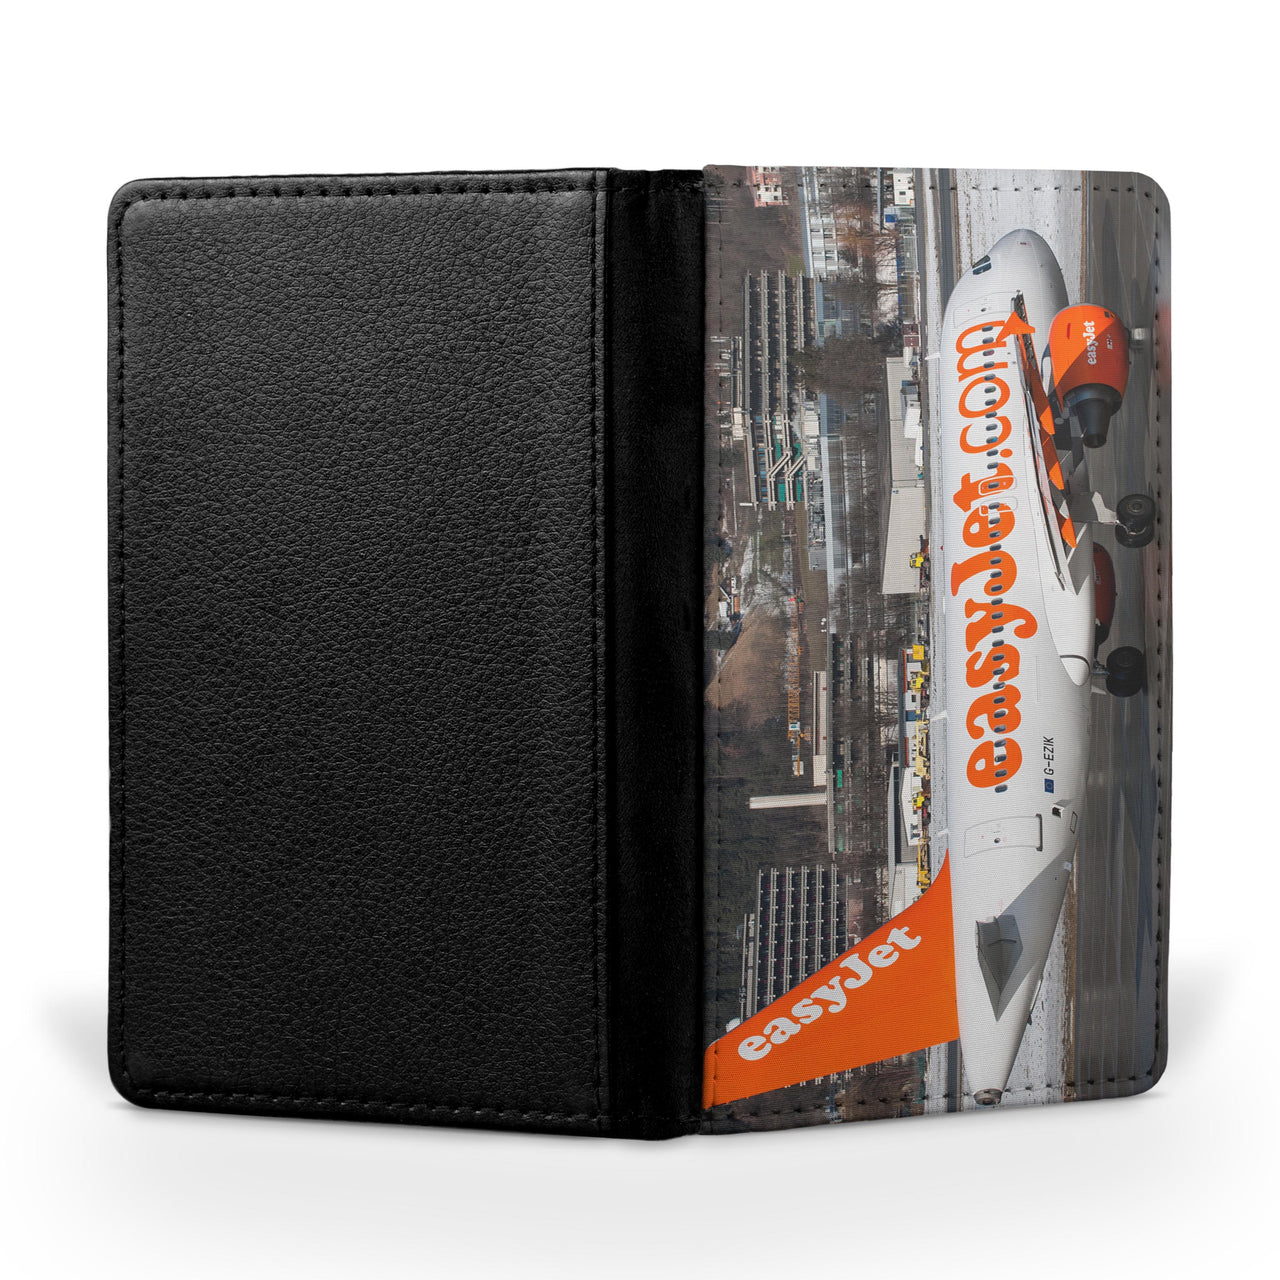 Easyjet's A320 Printed Passport & Travel Cases